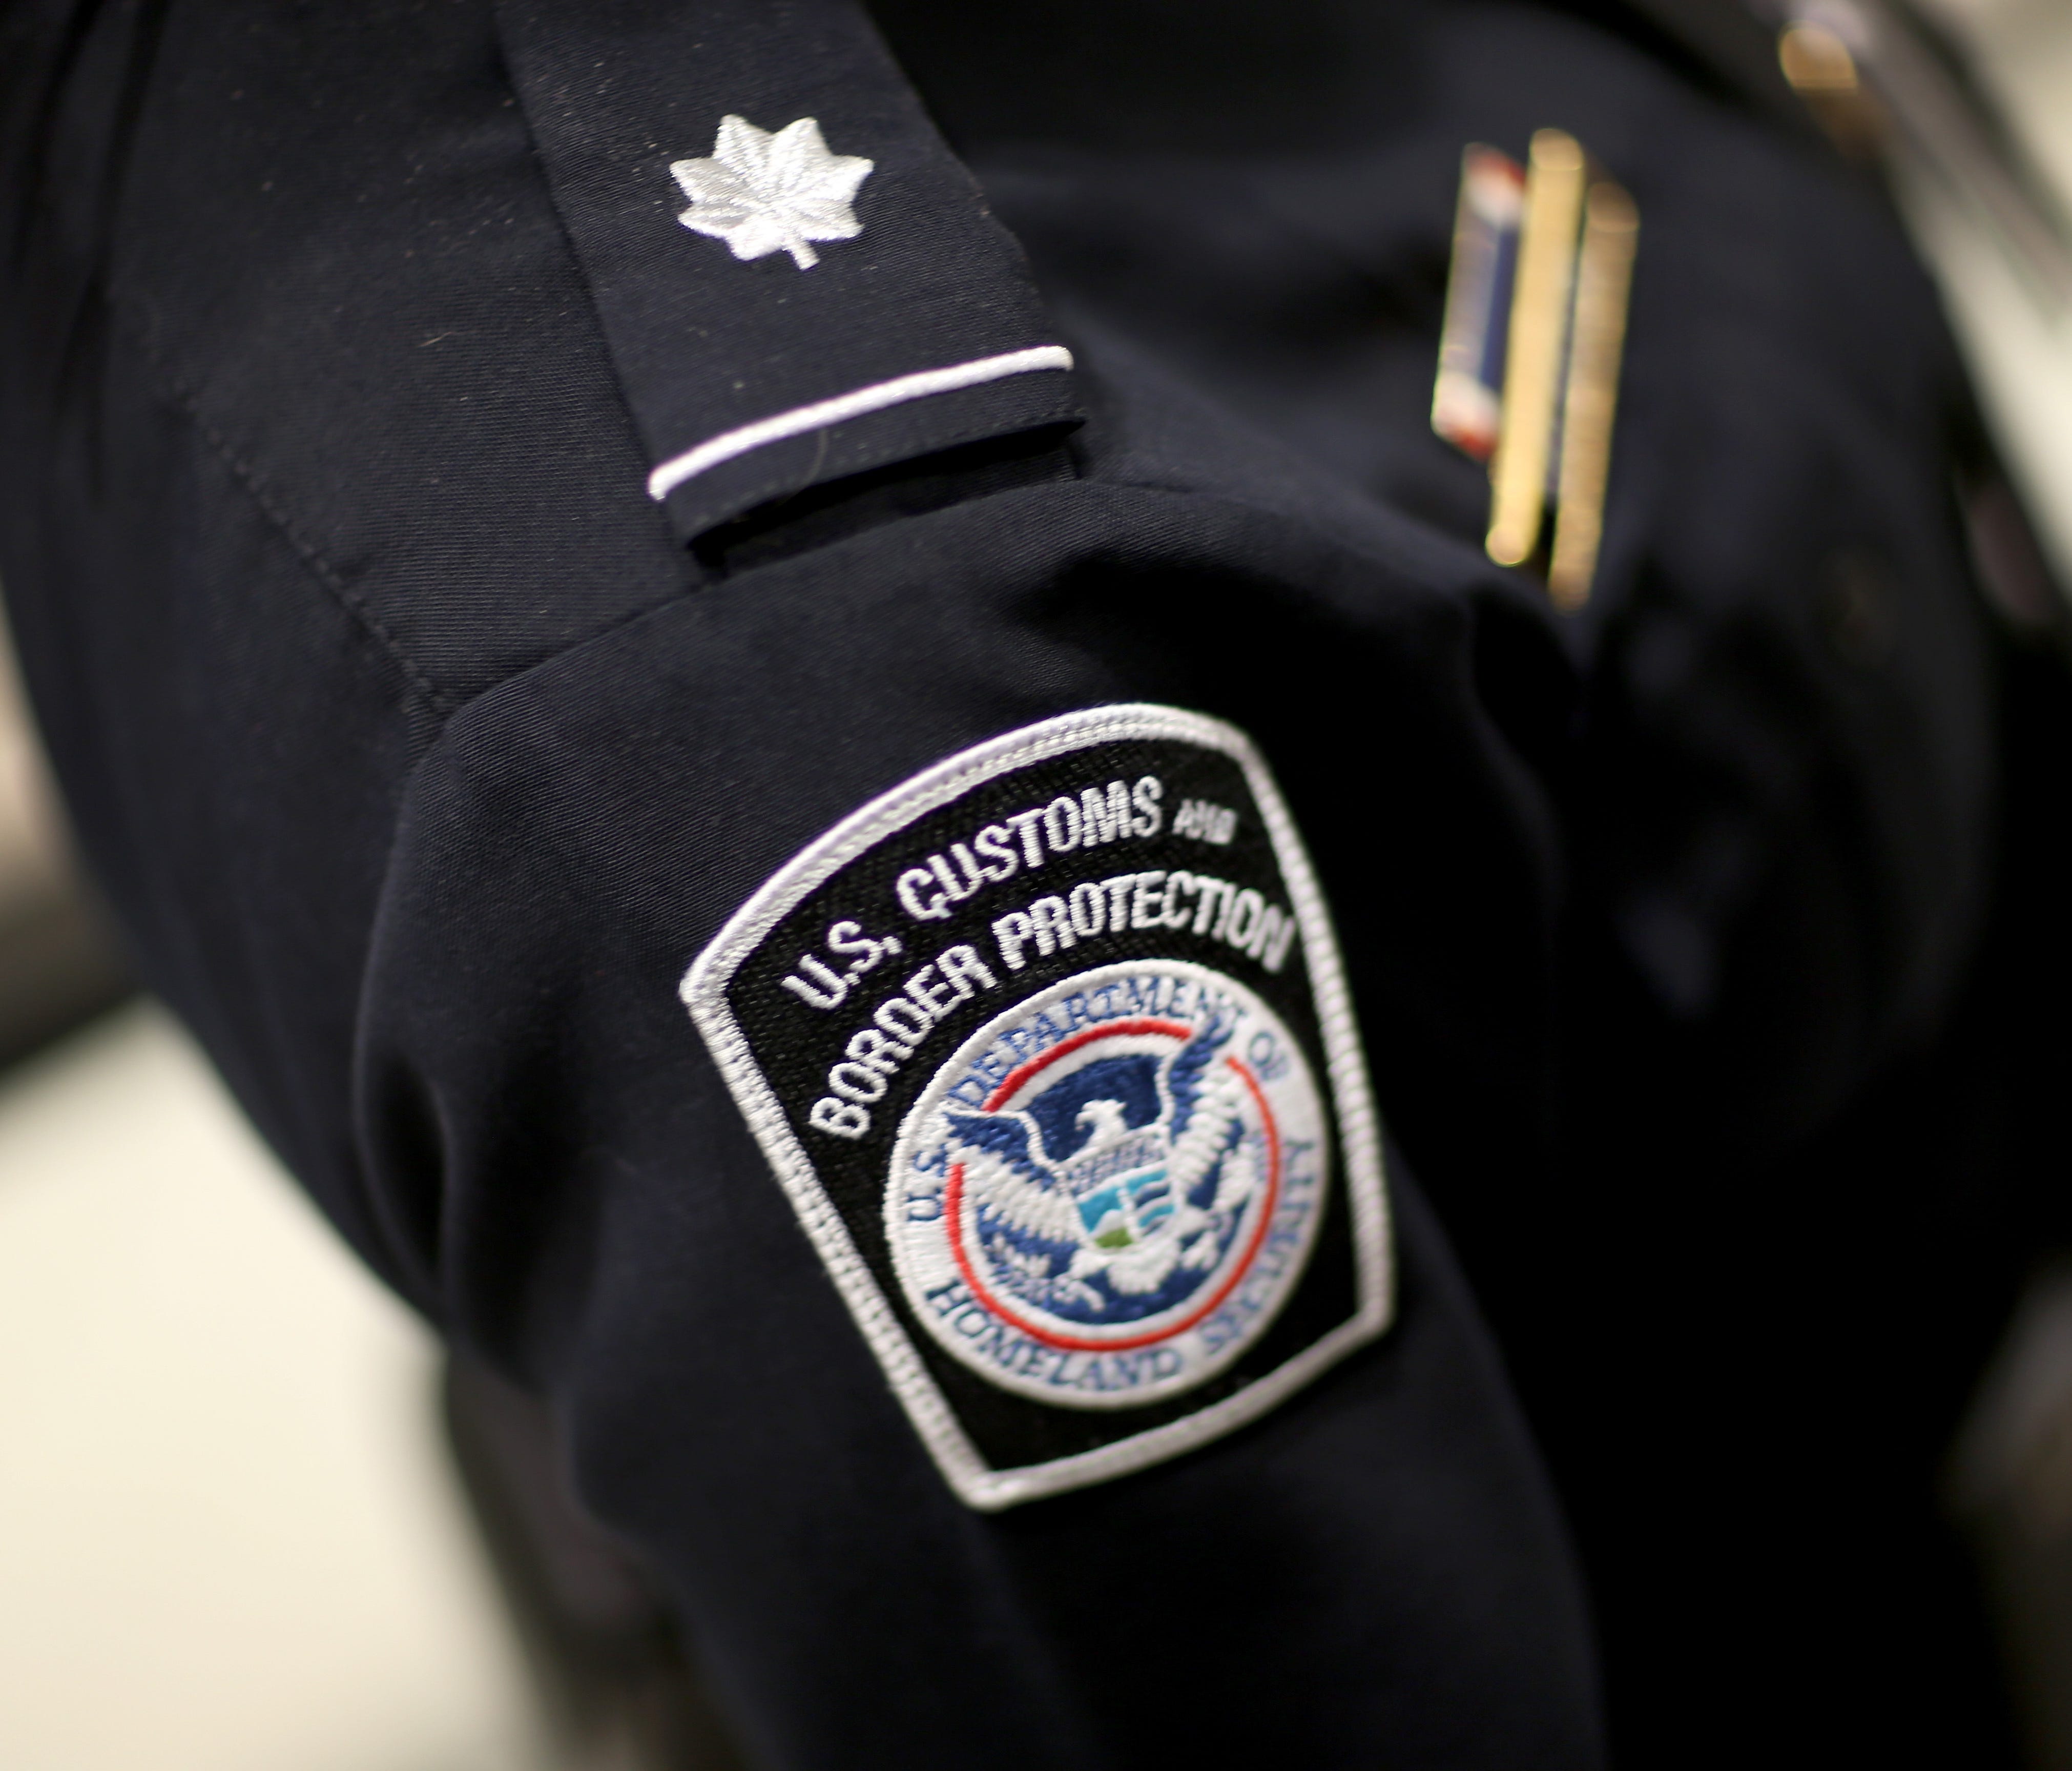 This file photo from March 2015 shows a U.S. Customs and Border Protection officer's patch.